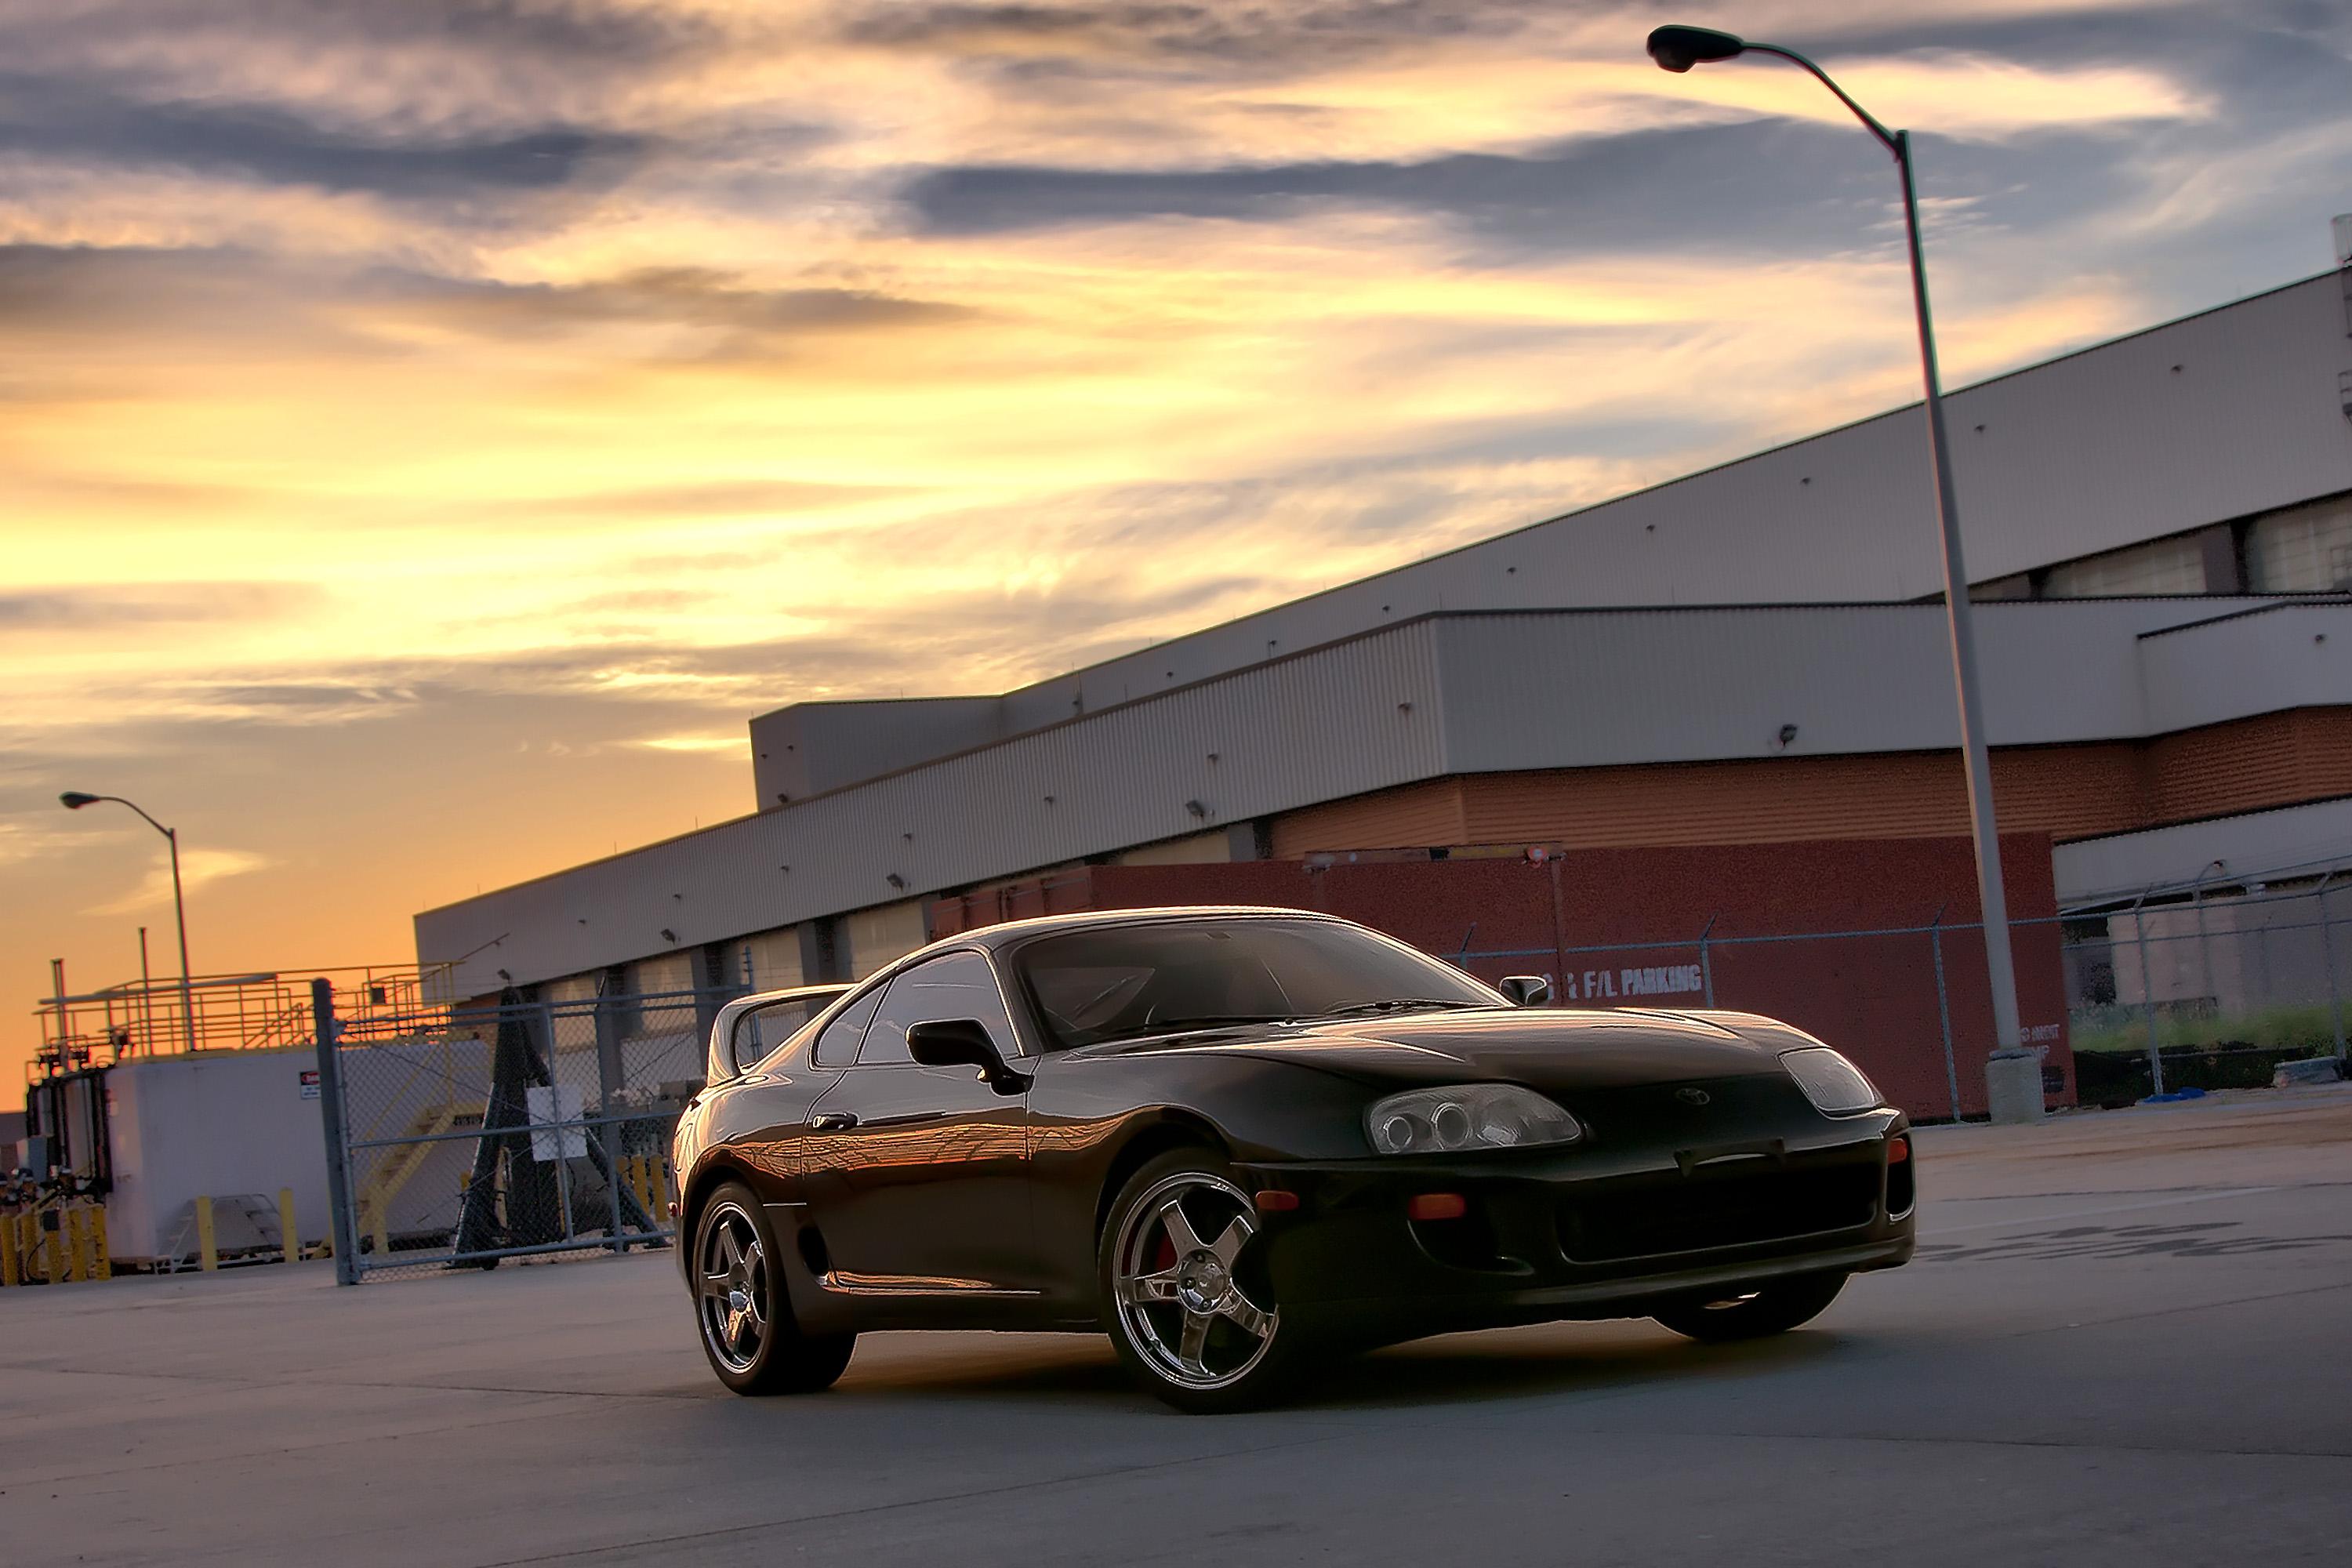 Your Ridiculously Awesome Toyota Supra Wallpaper Is Here